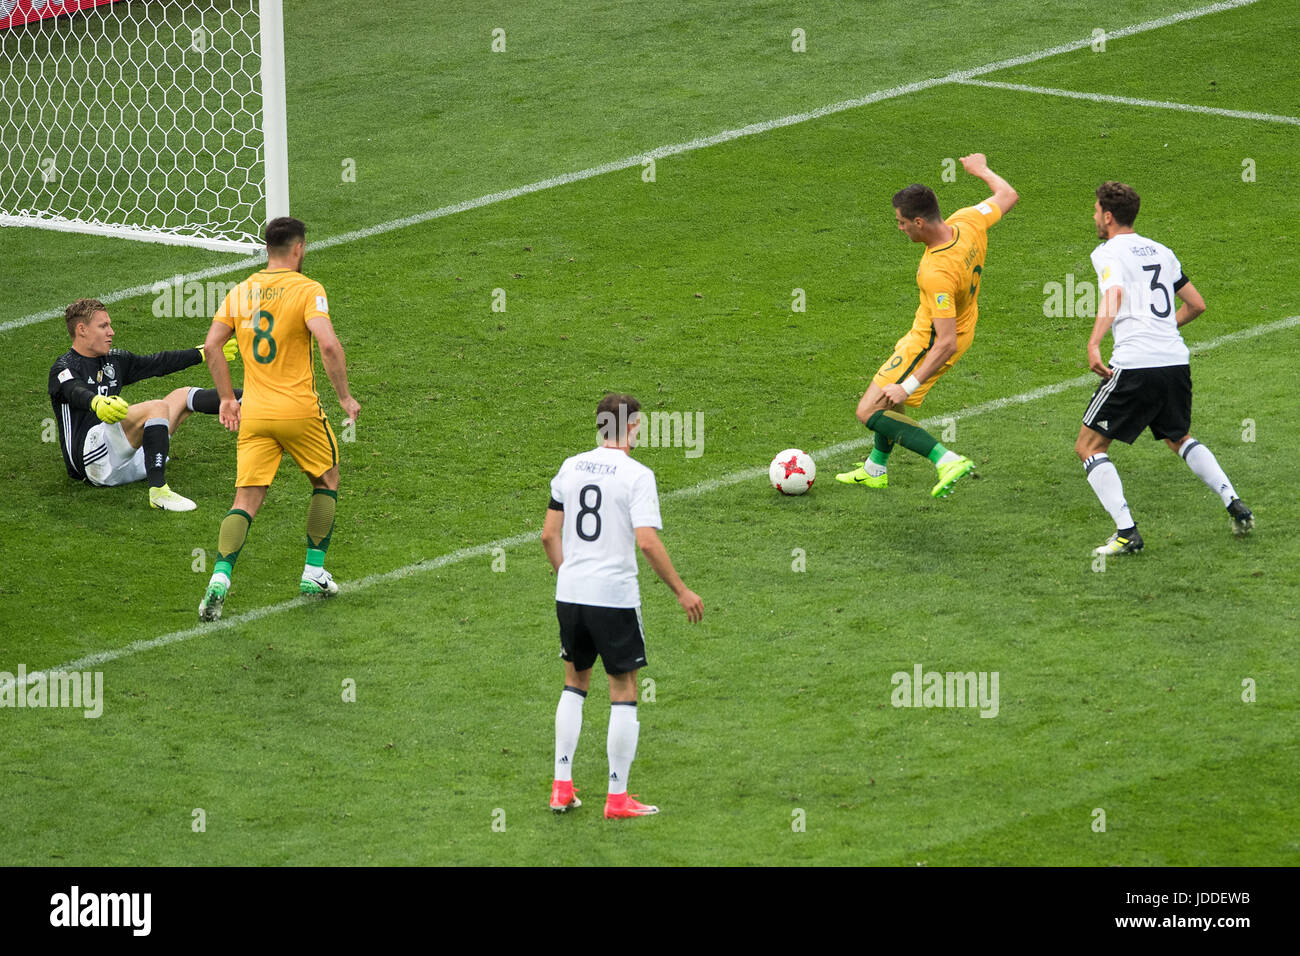 Sochi, Russia. 19th June, 2017. Australia's Tomi Juric (2-R) puts the ball past Germany's goalkeeper Bernd Leno (L) as Australia's Bailey Wright (L-R), Germany's Leon Goretzka and Jonas Hector look on to leave the score at 3:2 in Germany's favour during the Confederations Cup group stages Group B match between Australia and Germany in the Fisht Stadium in Sochi, Russia, 19 June 2017. Germany won 3:2. Photo: Marius Becker/dpa/Alamy Live News Stock Photo